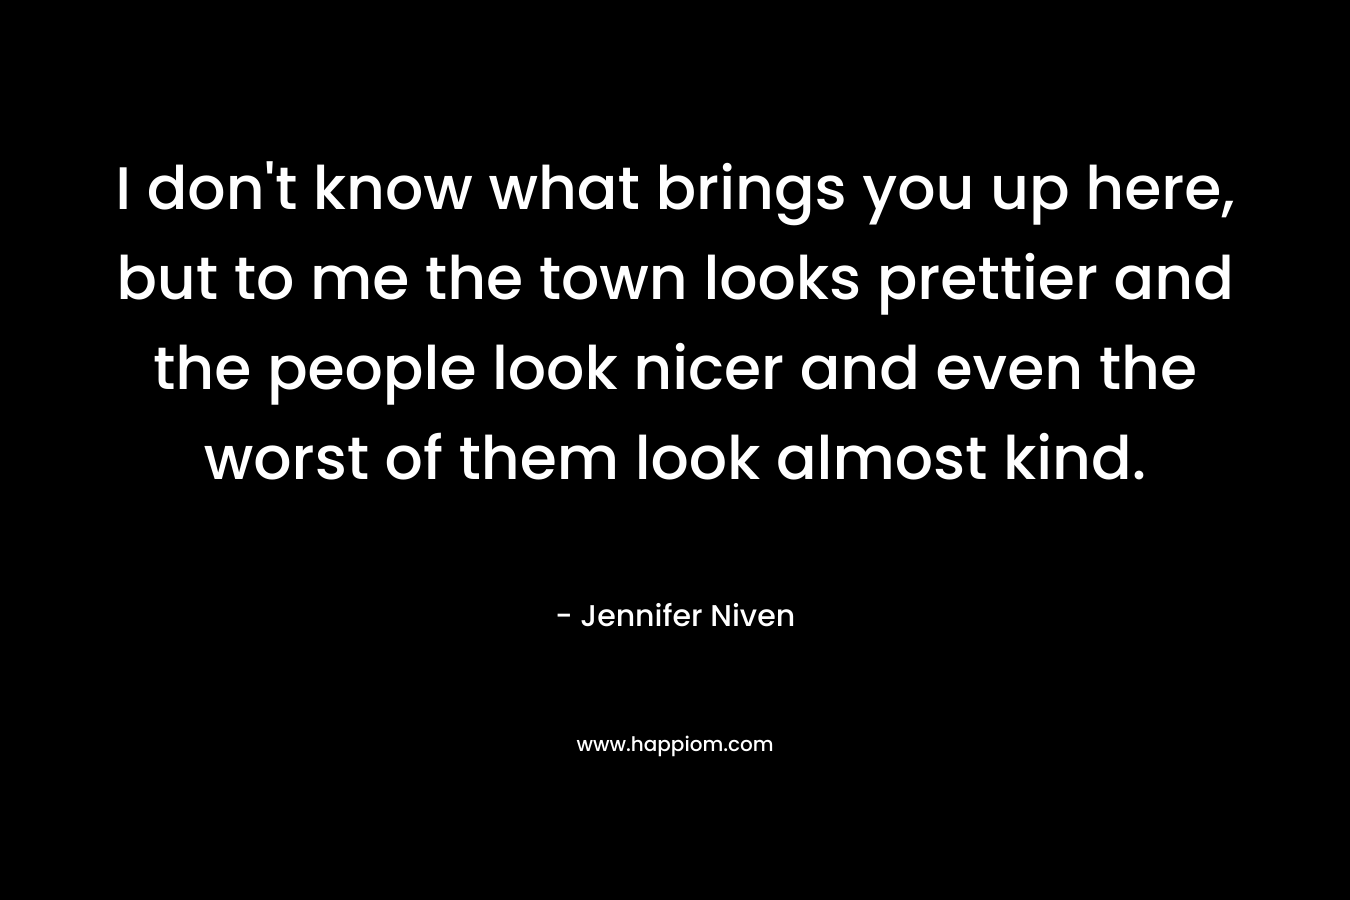 I don’t know what brings you up here, but to me the town looks prettier and the people look nicer and even the worst of them look almost kind. – Jennifer Niven